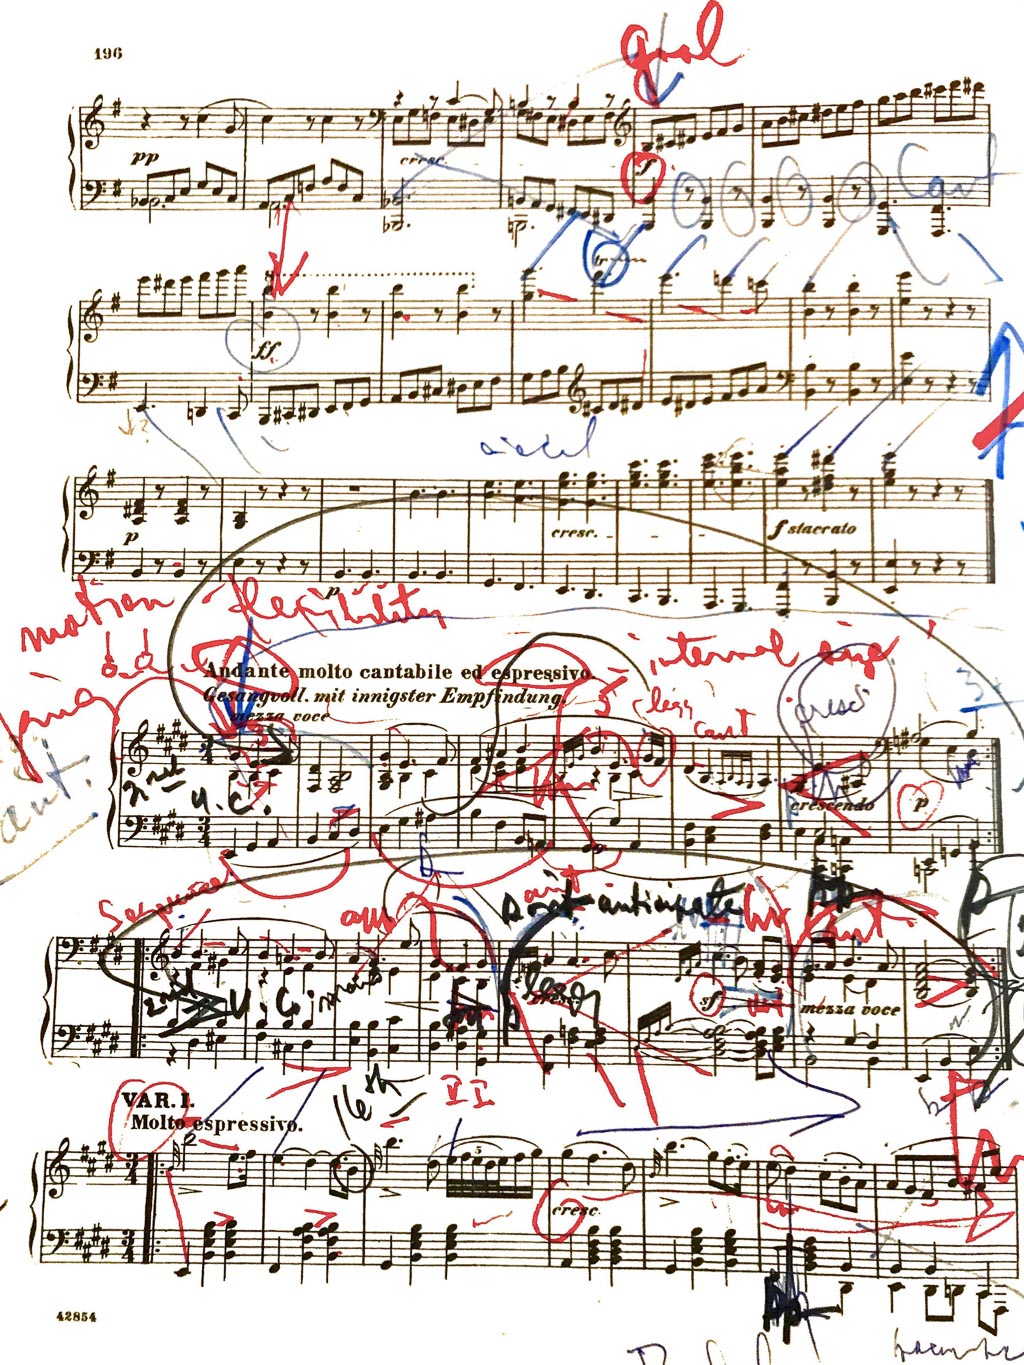 A page of music manuscript, Debussy prelude, with instructional markings in various colors, by Harold Zabrack.